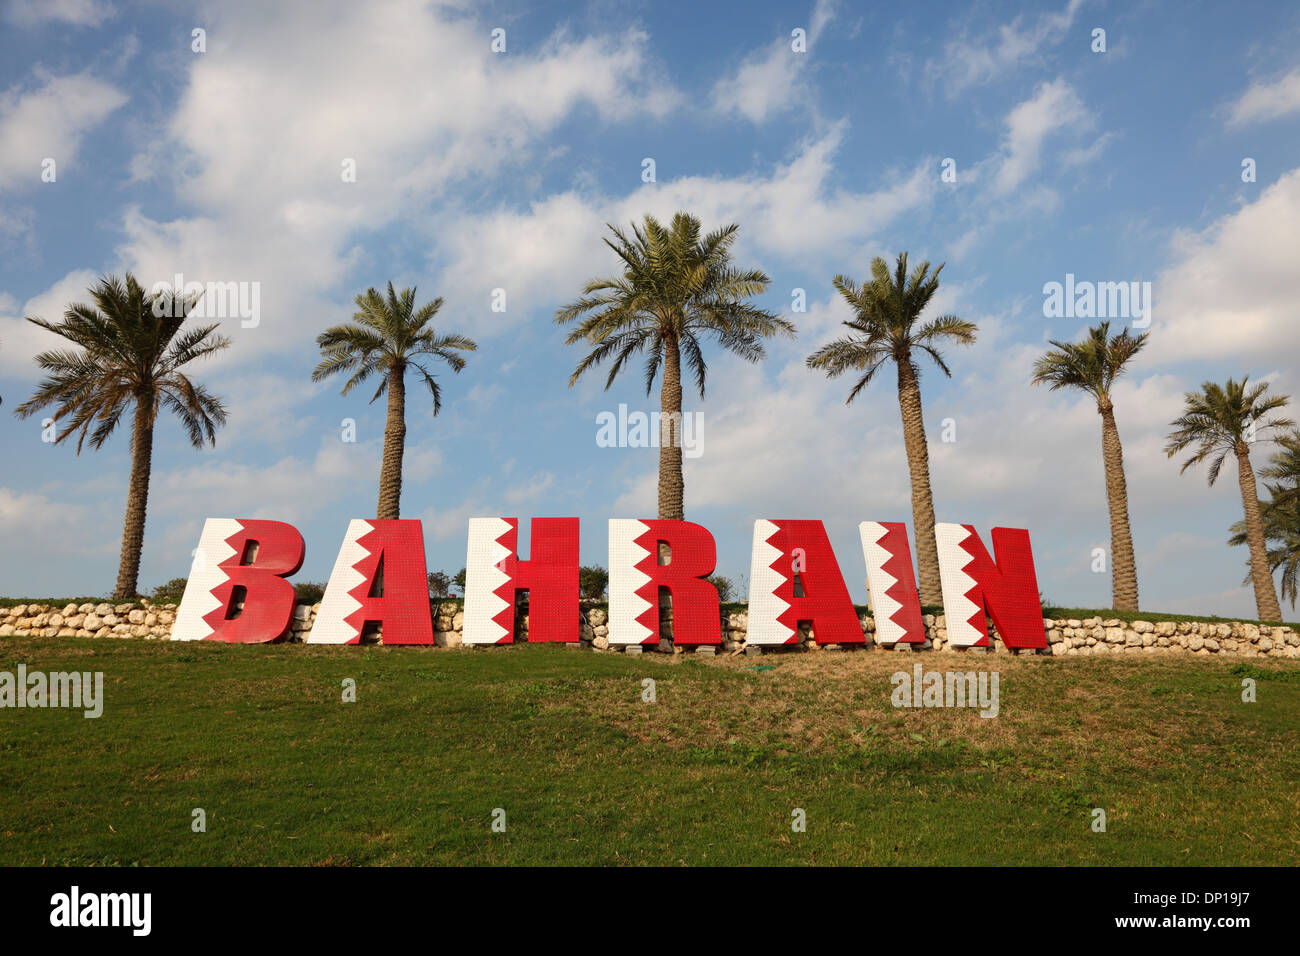 Bahrain sign under Palm Trees in Manama Stock Photo